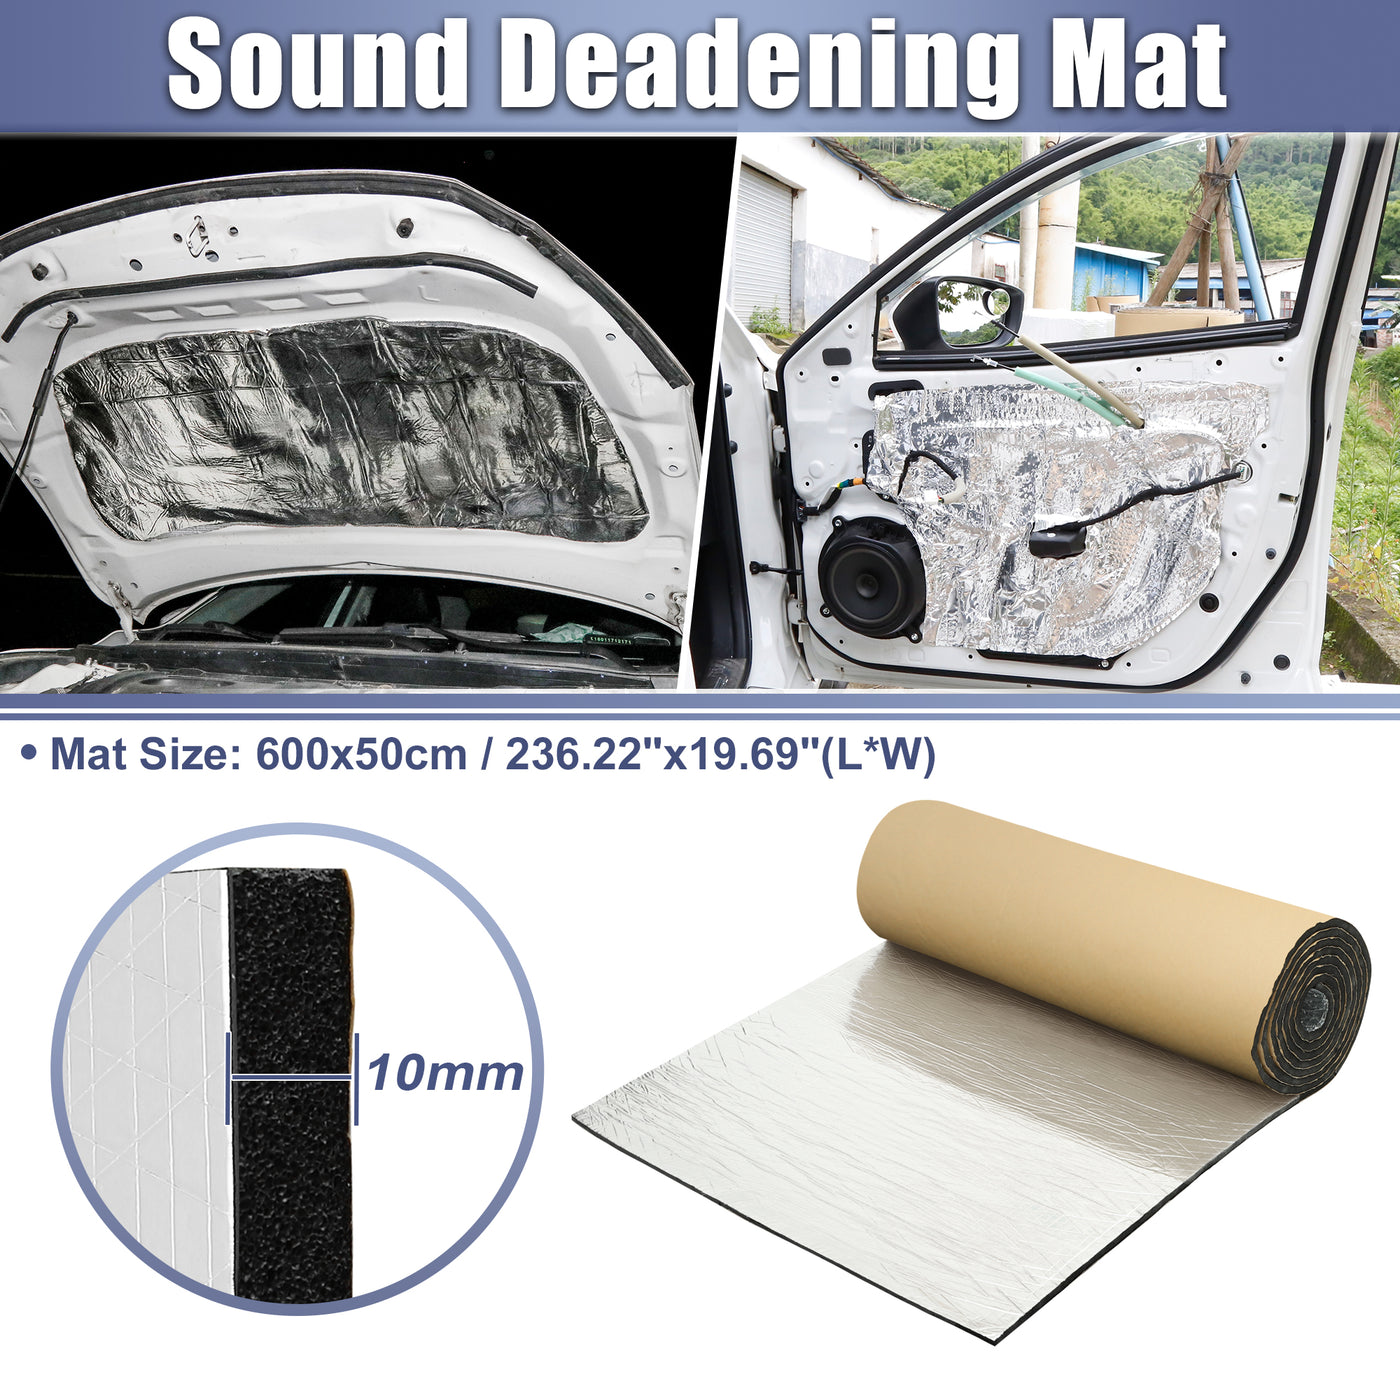 X AUTOHAUX 394mil 10mm 32.29sqft Car Sound Deadening Mat Aluminum Foil Closed Cell Foam Heat Shield Material Self Adhesive Universal for Hood Fender and Boat Engine Cover 236.22"x19.69"